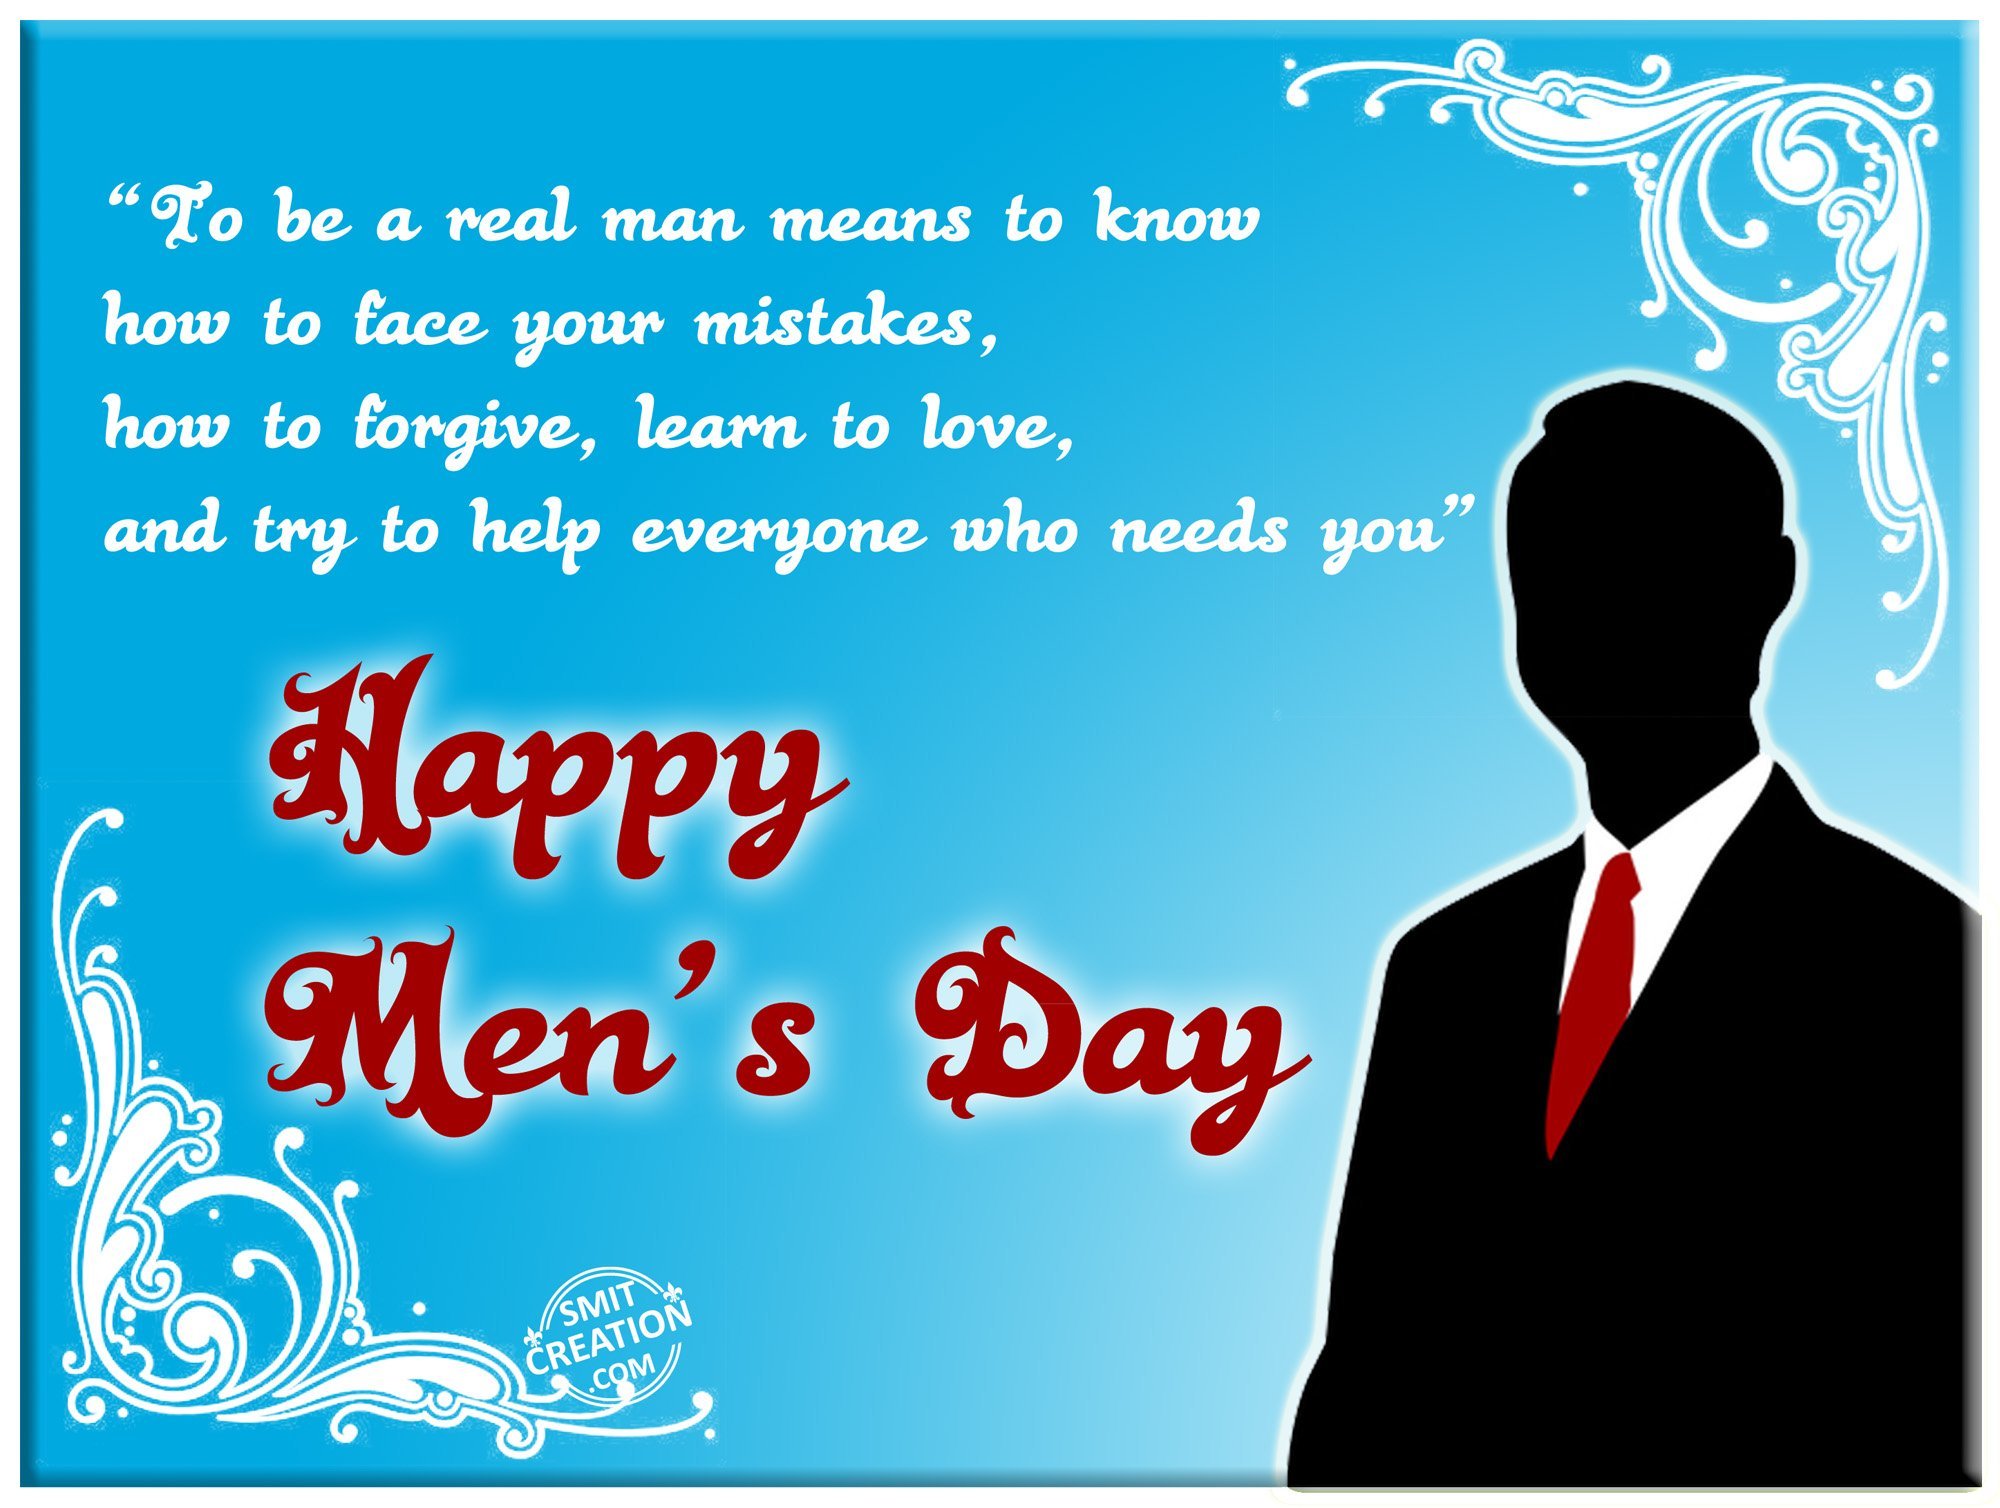 happy men’s day greeting card